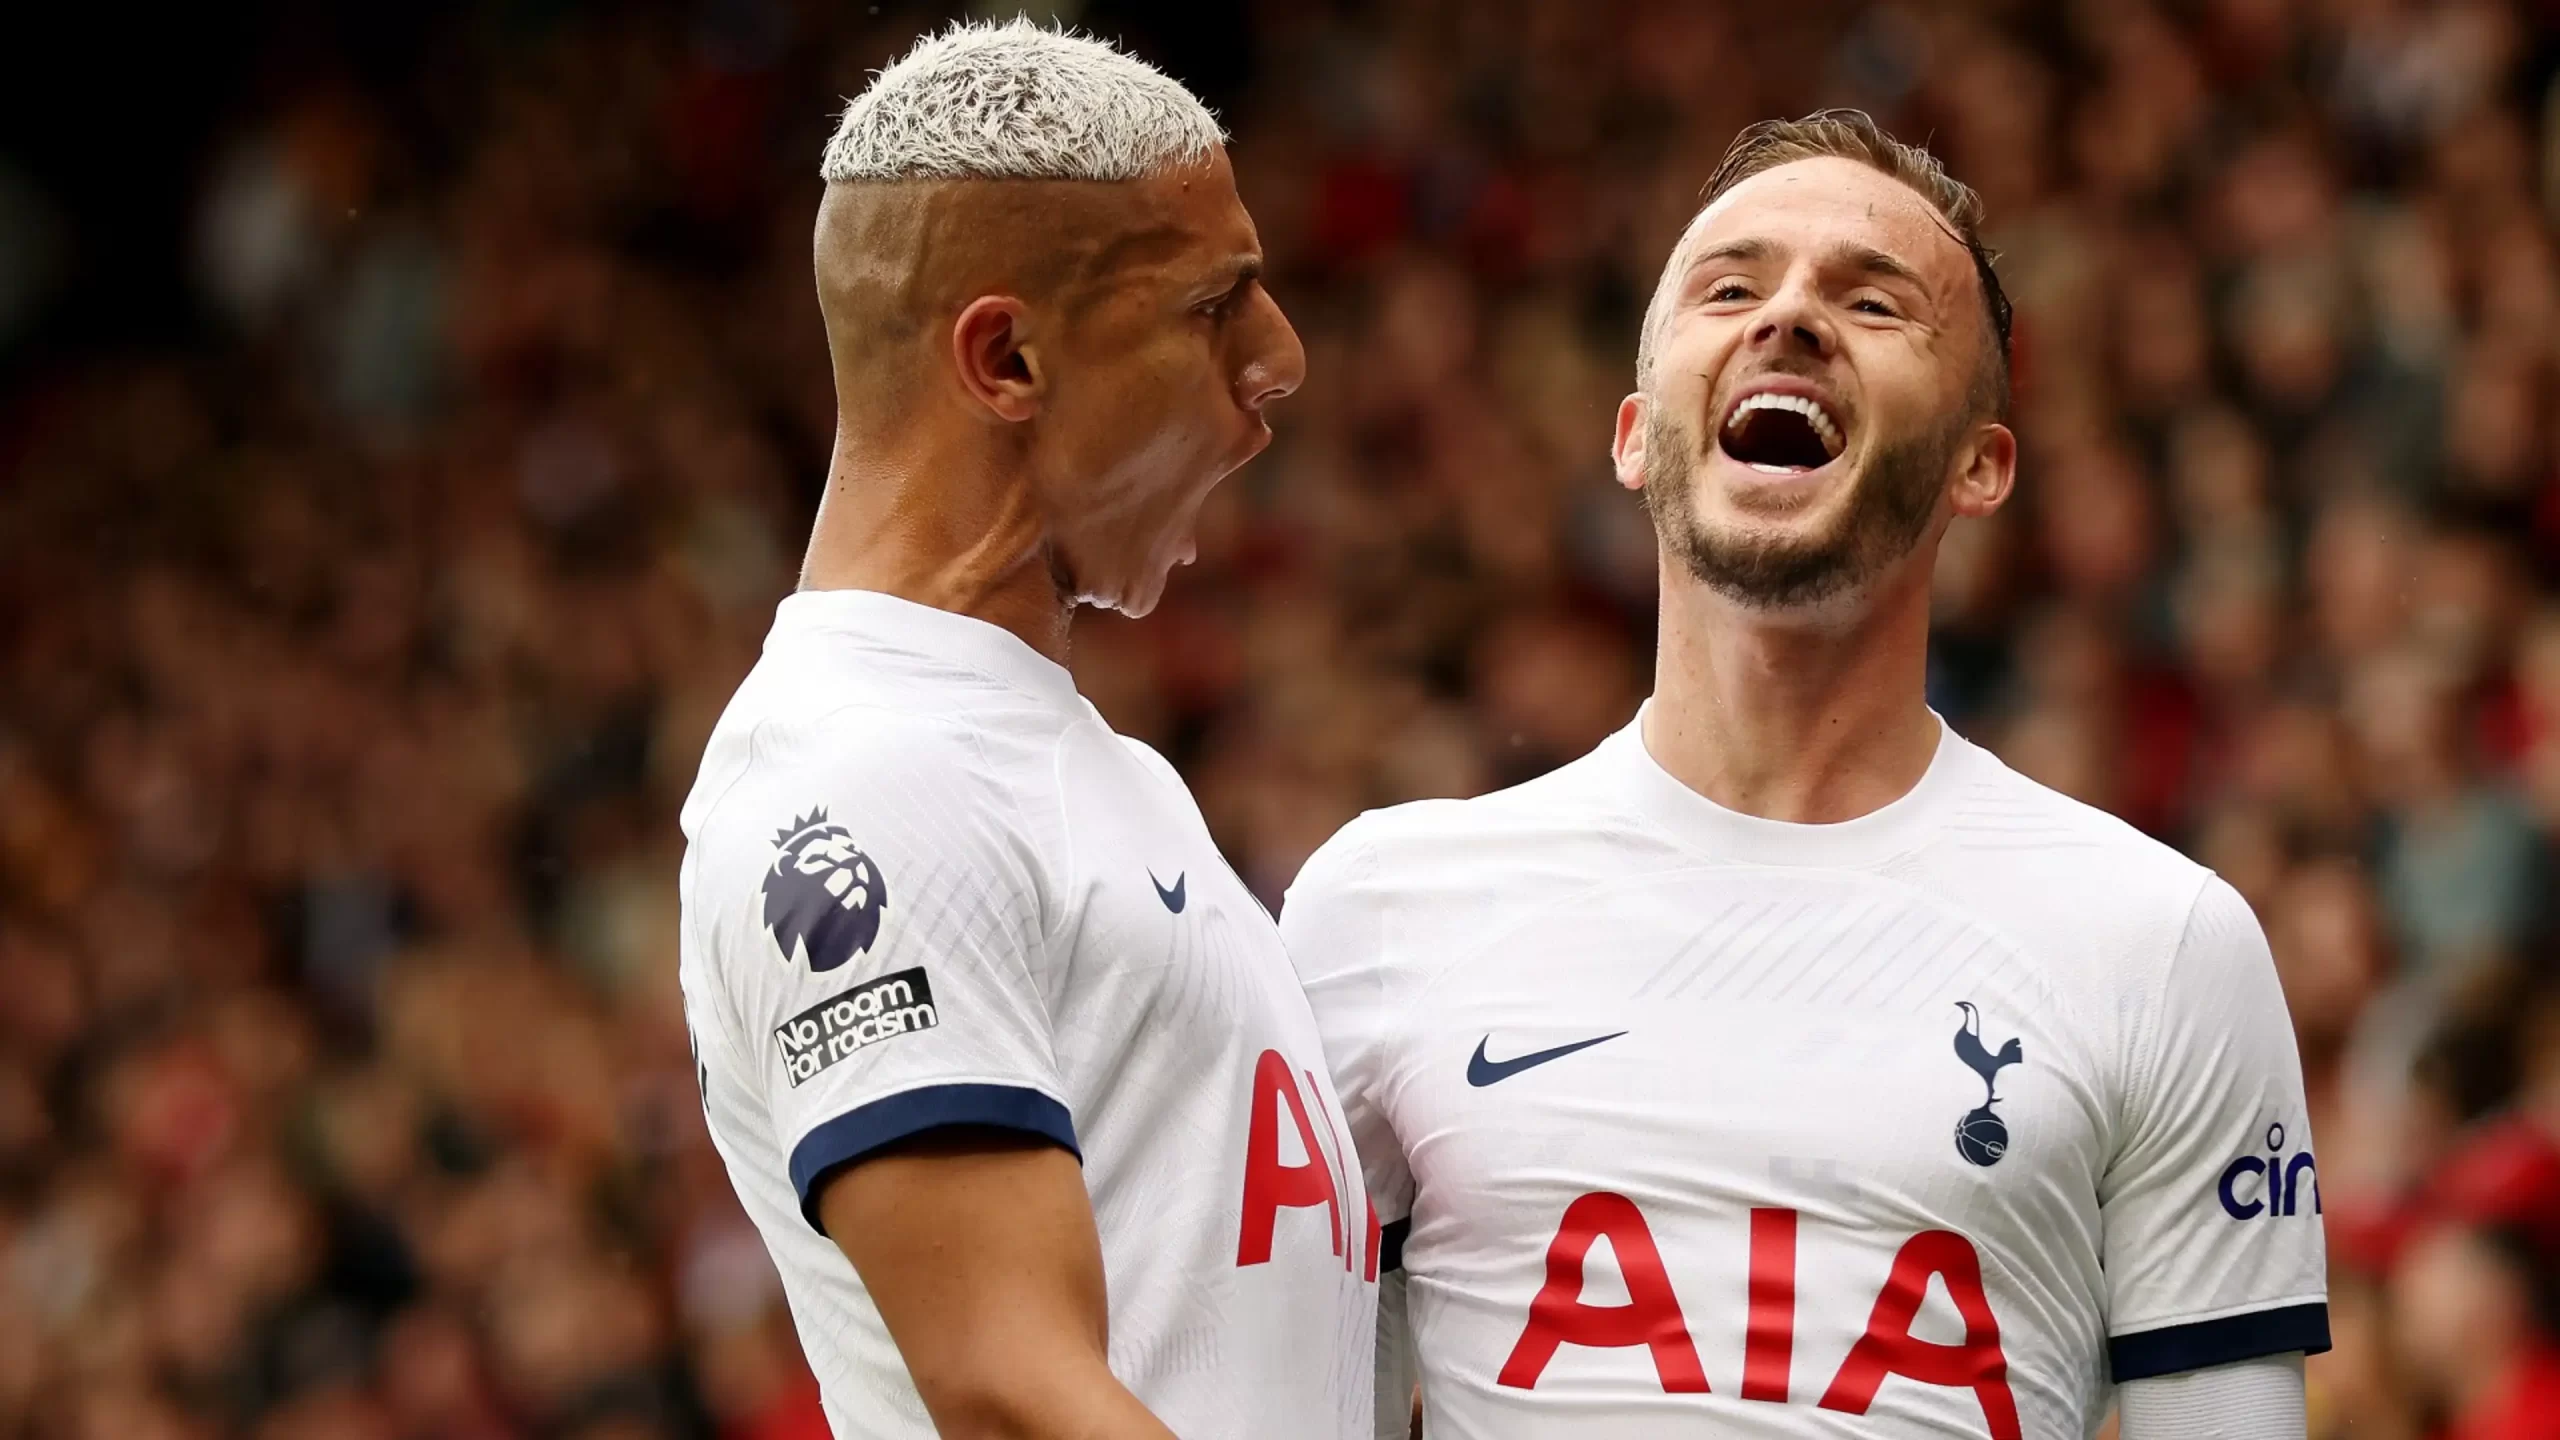 Richarlison Helps Tottenham Hotspur Come Back and Win